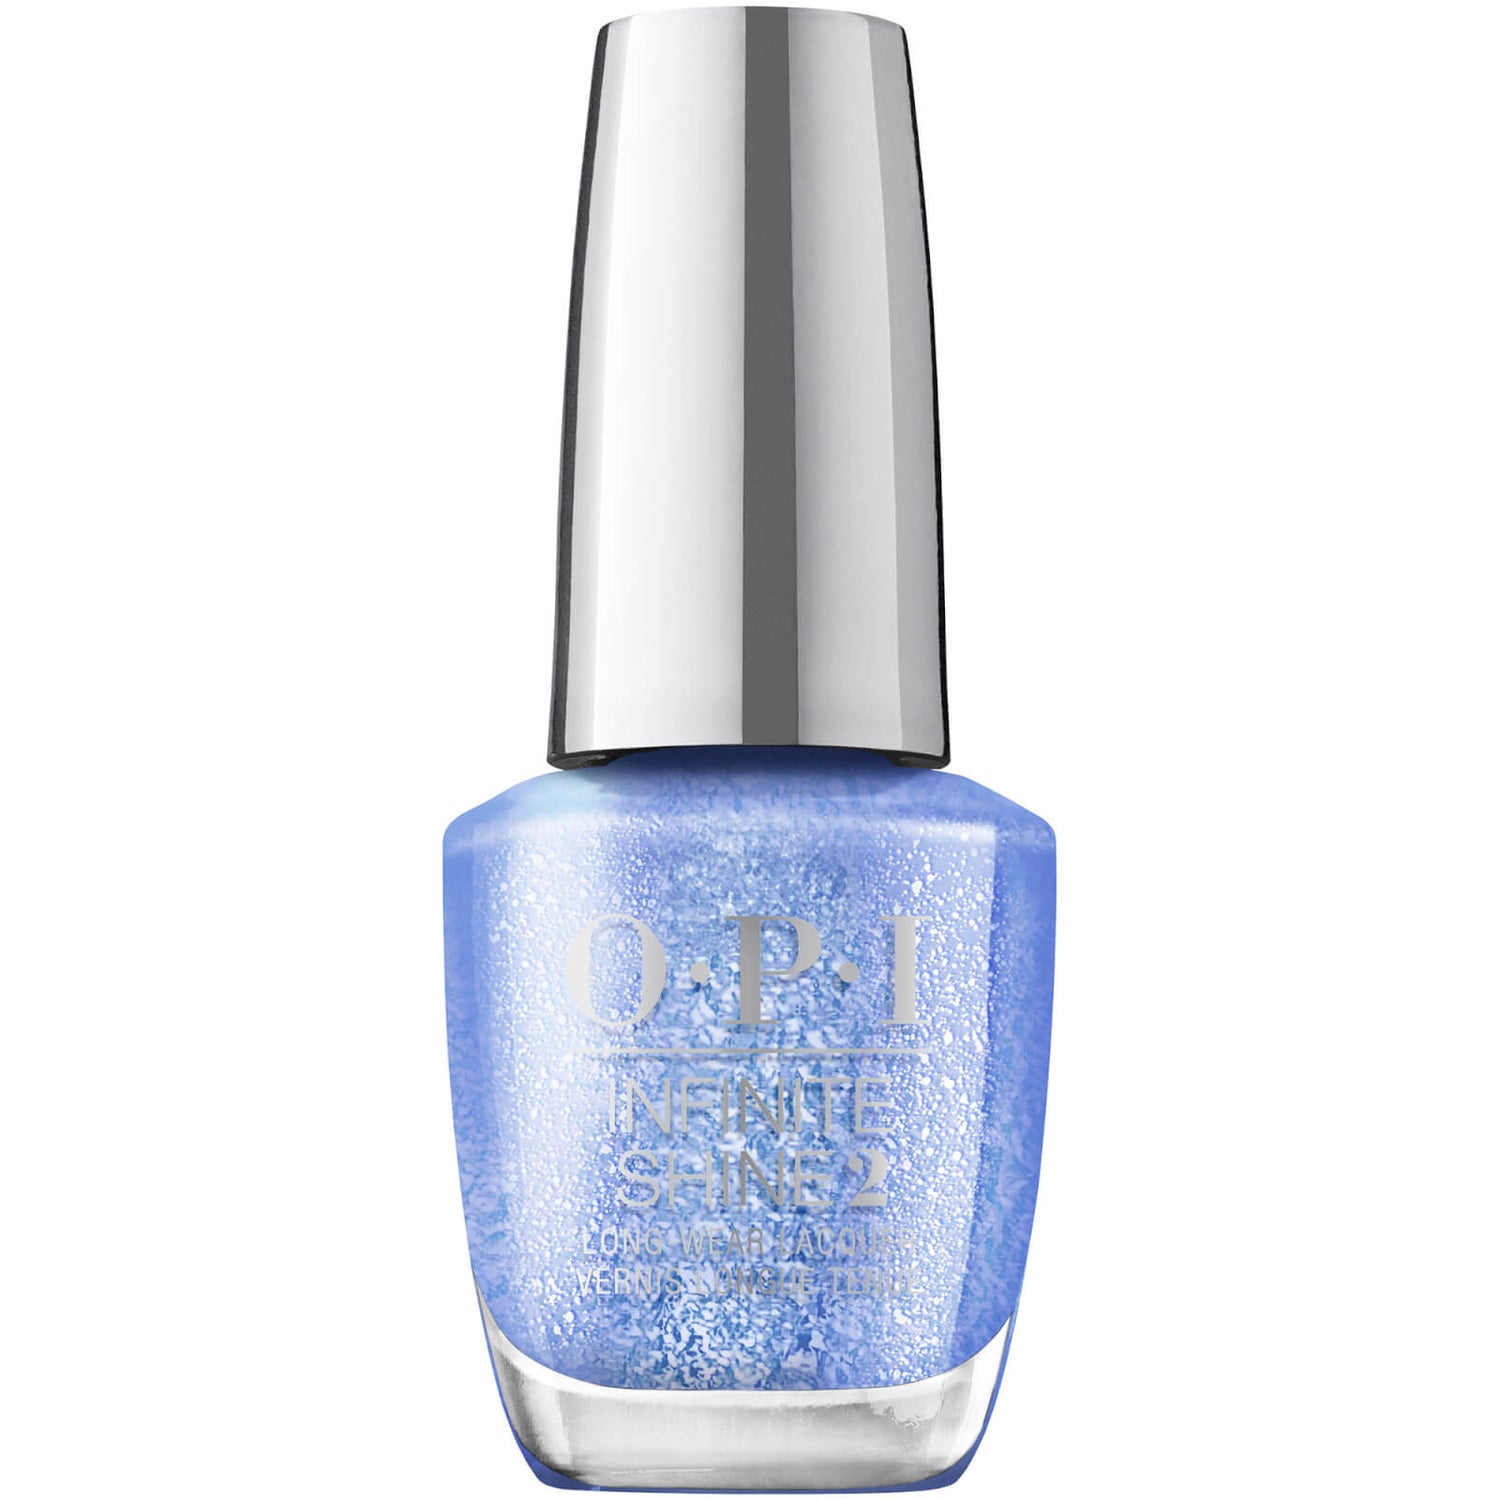 OPI Jewel Be Bold Collection Infinite Shine Nail Polish - The Pearl of Your Dreams